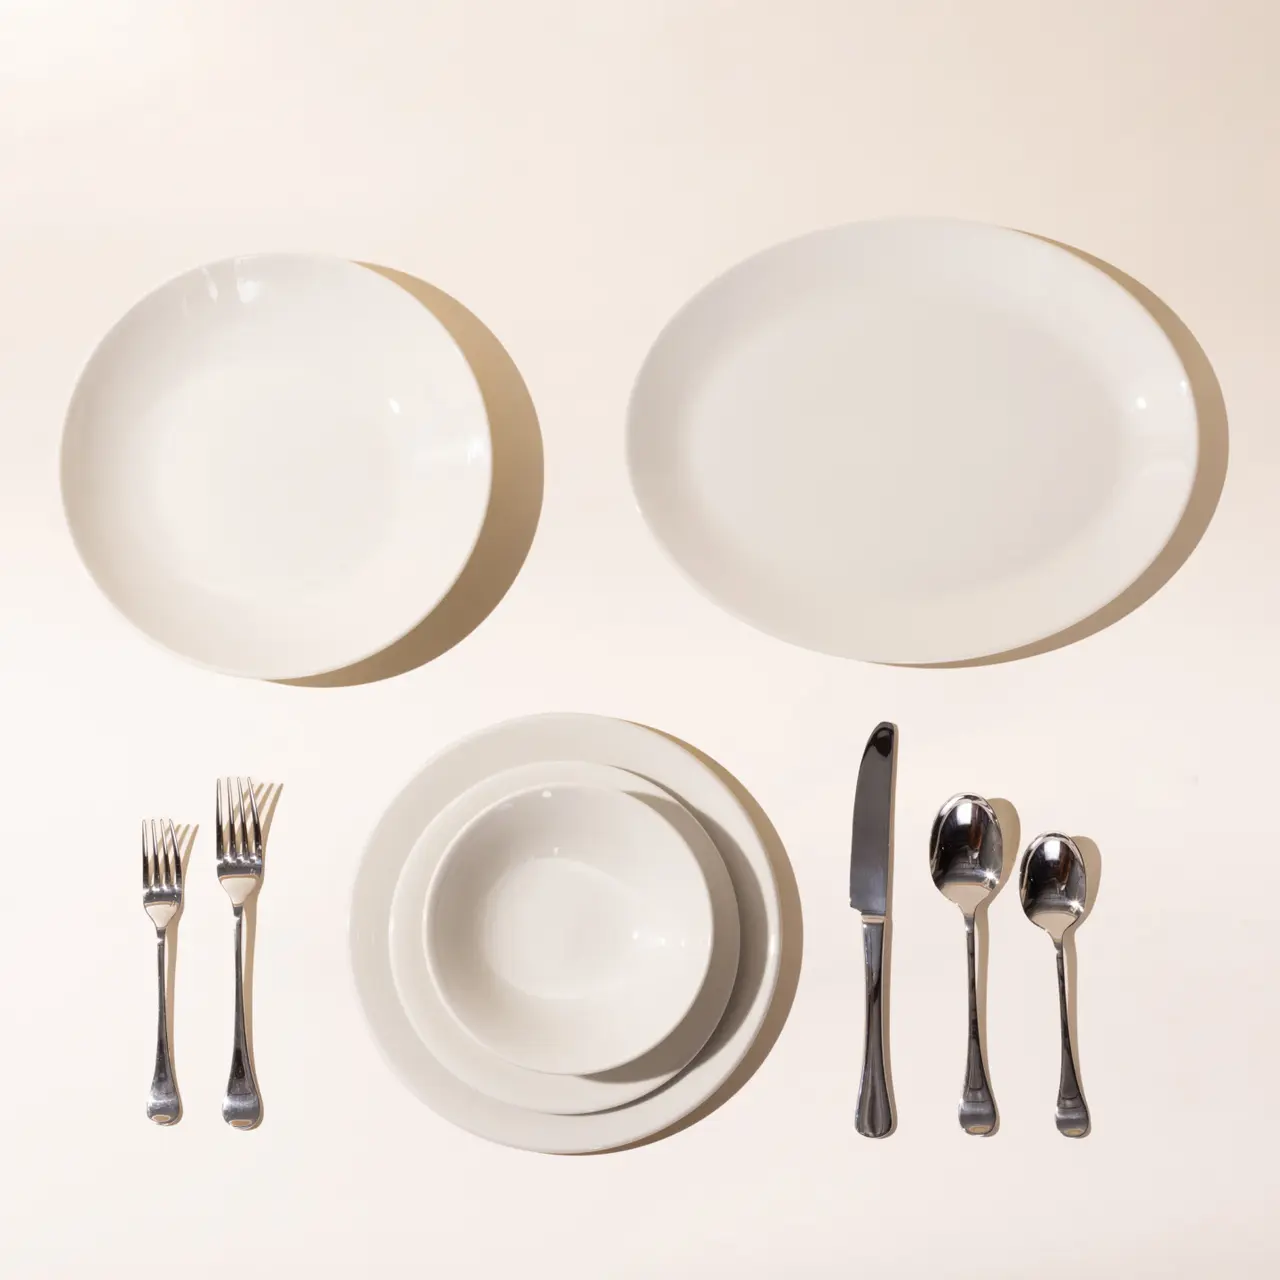 A neatly arranged dining set for two, with plates, bowls, forks, knives, and spoons on a plain background.